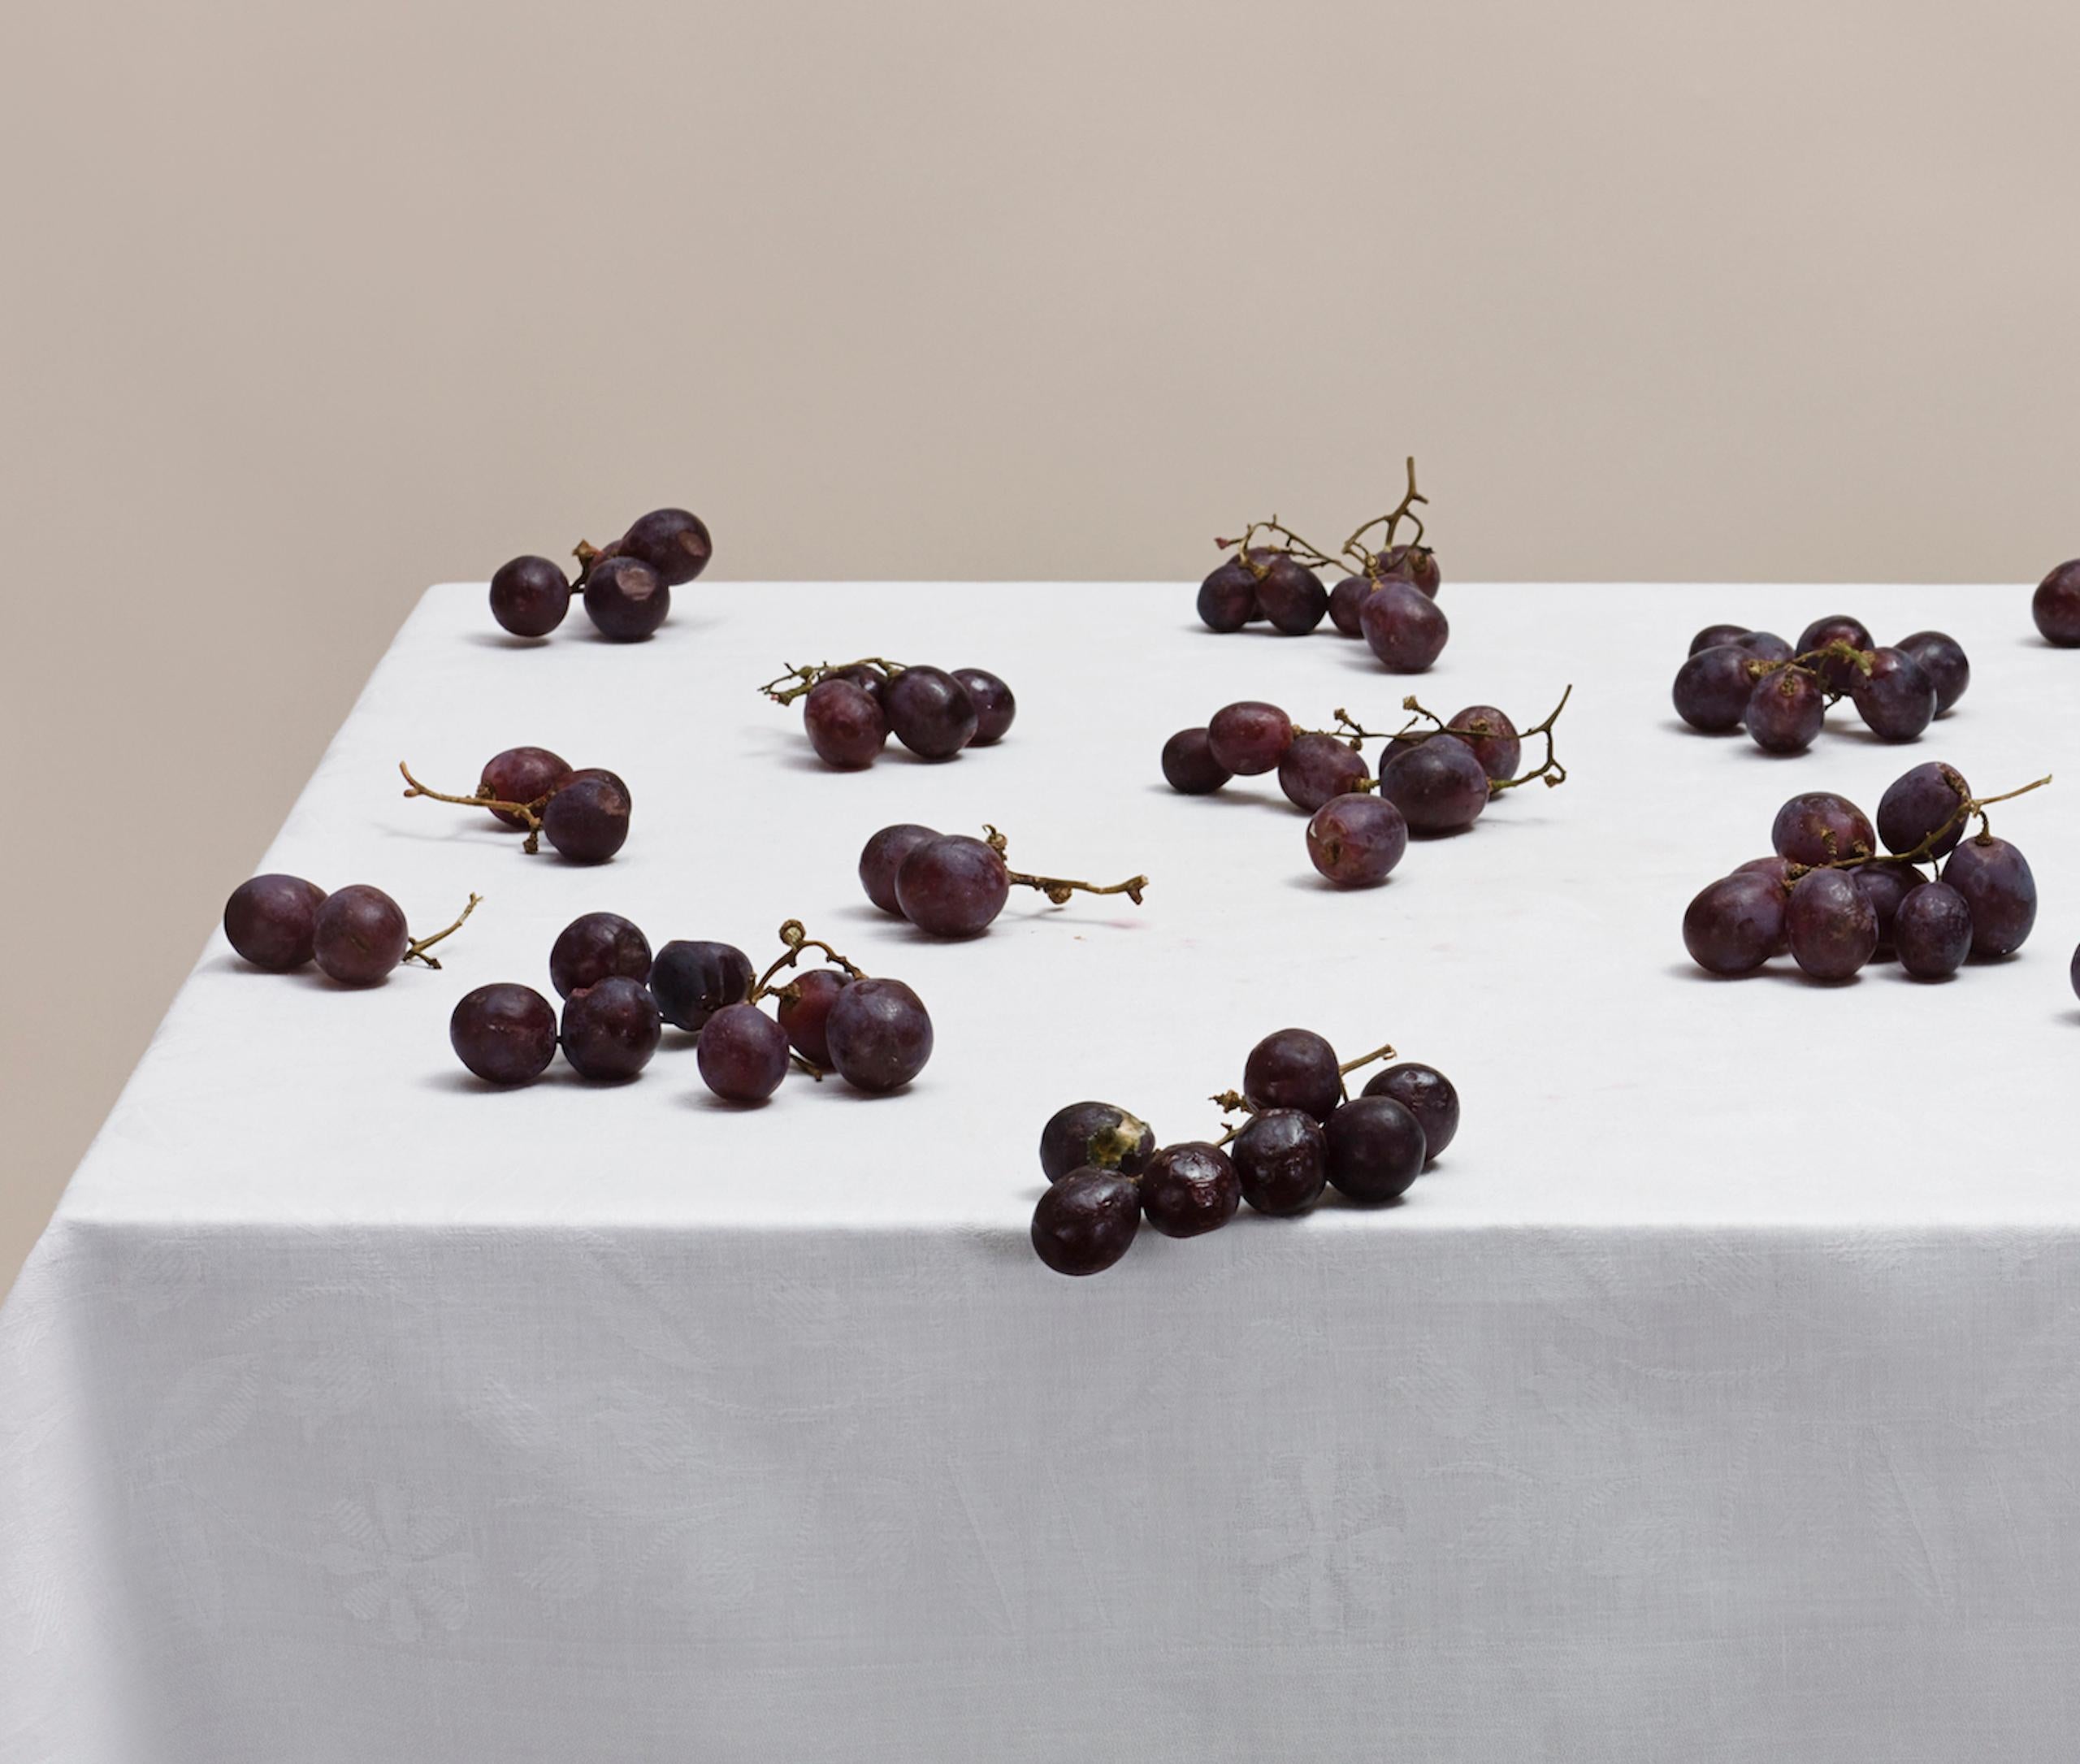 Untitled (#08-23) by Pawel Żak - Contemporary studio photography, grape, fruits For Sale 2